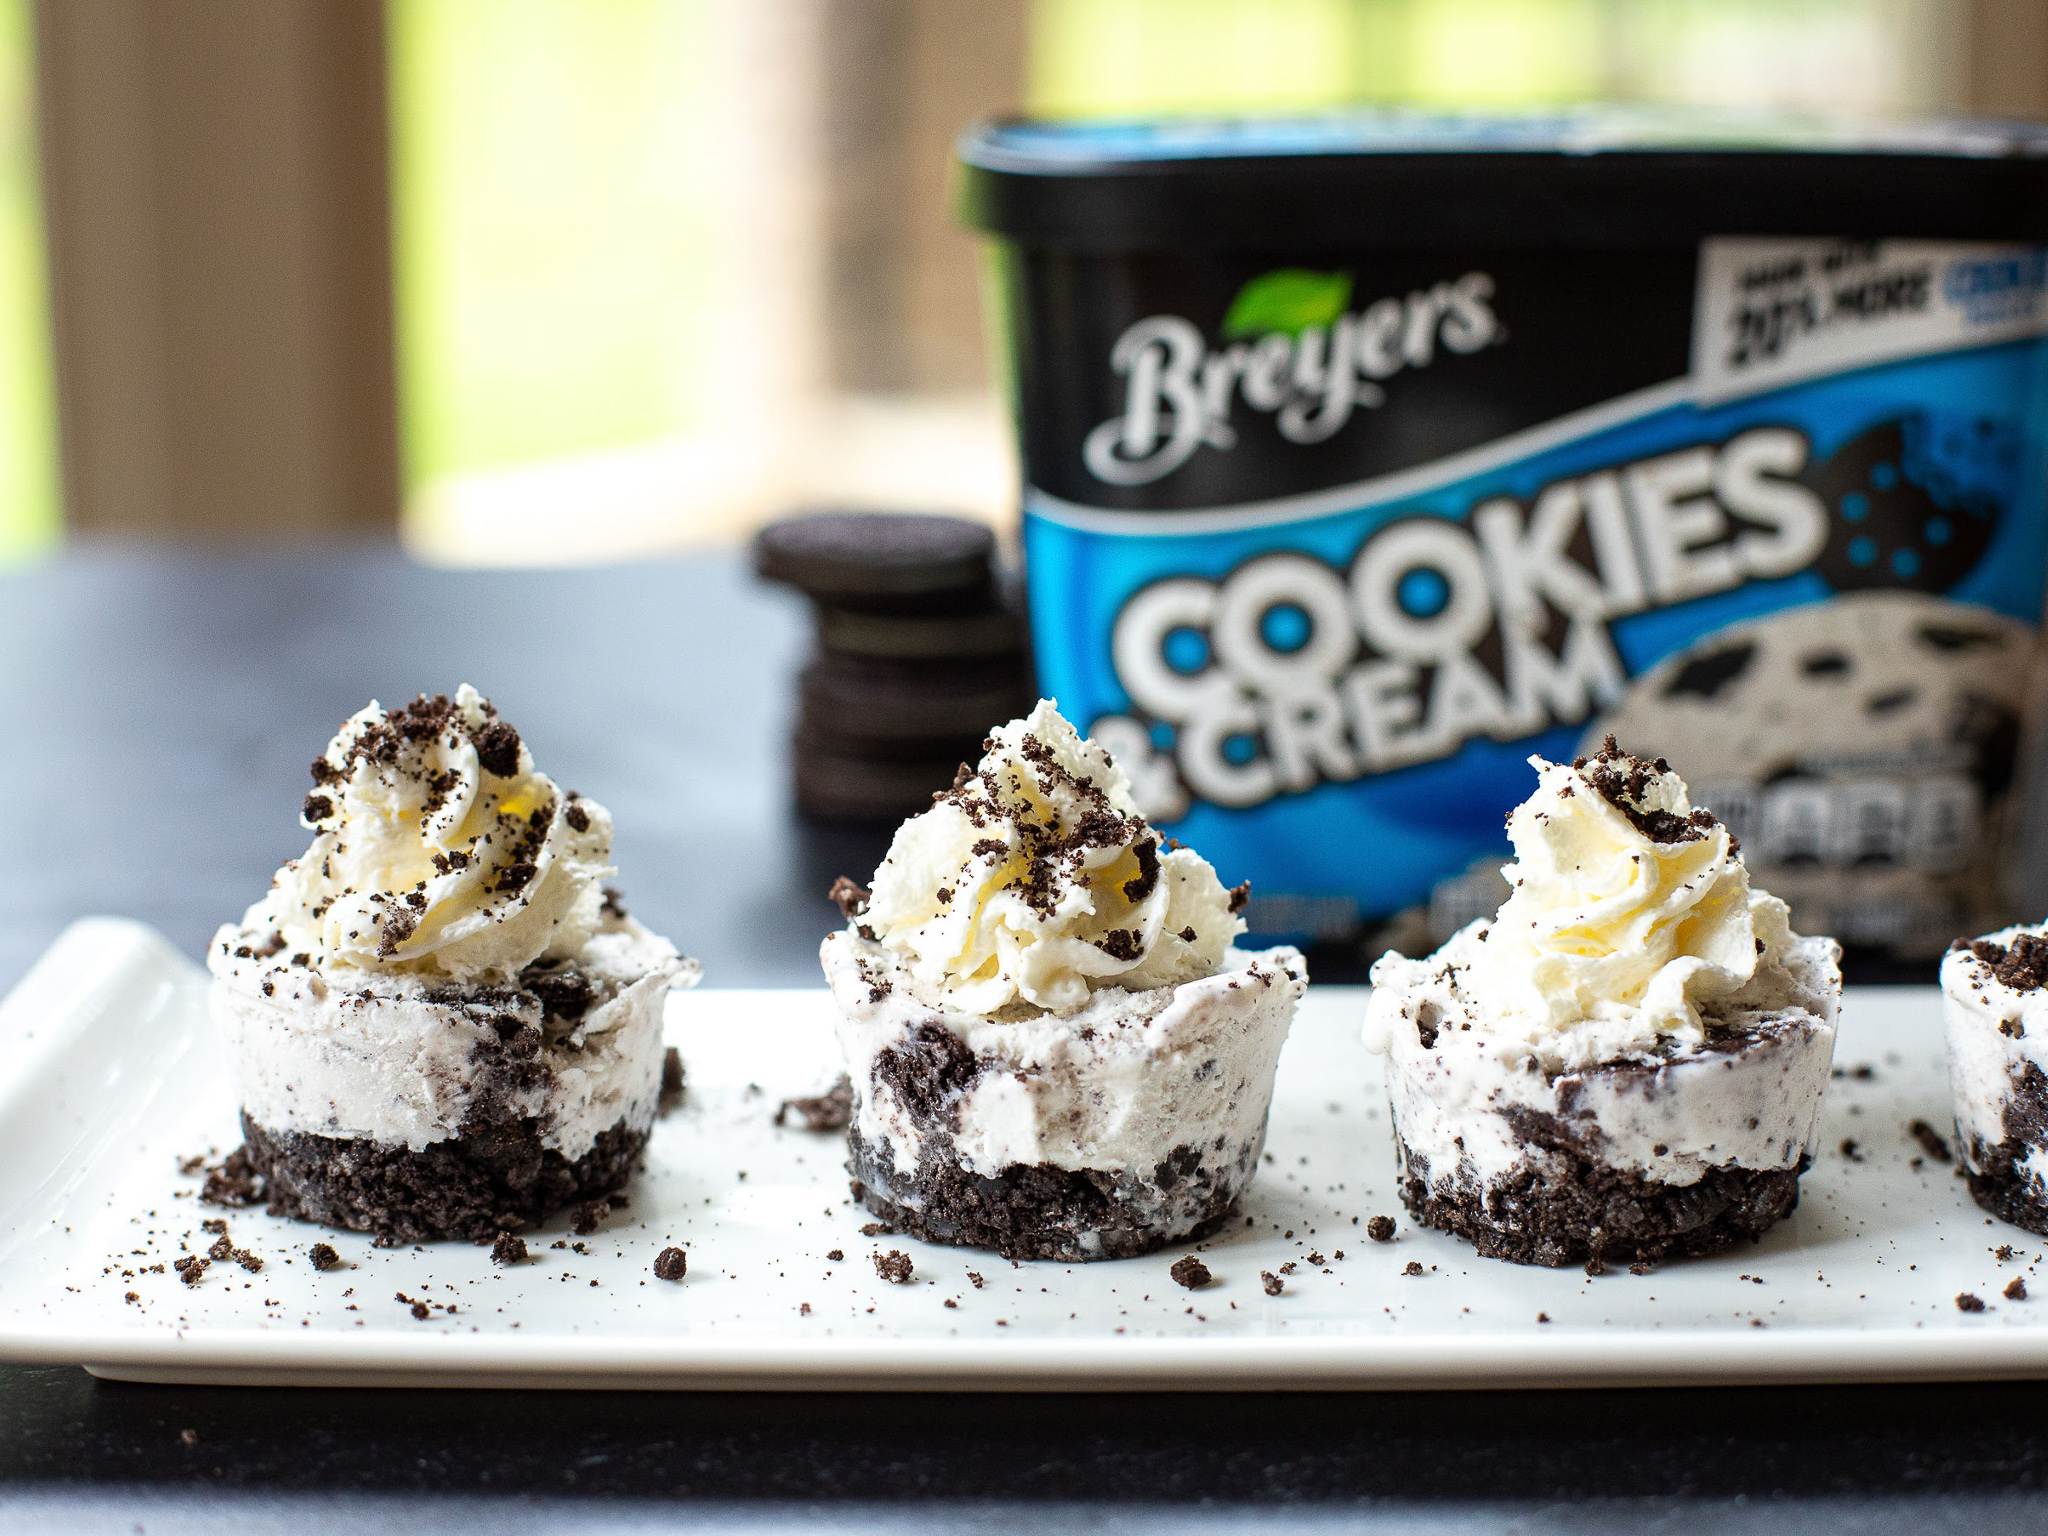 New Breyers Coupon Makes Ice Cream As Low As $2.05 At Publix on I Heart Publix